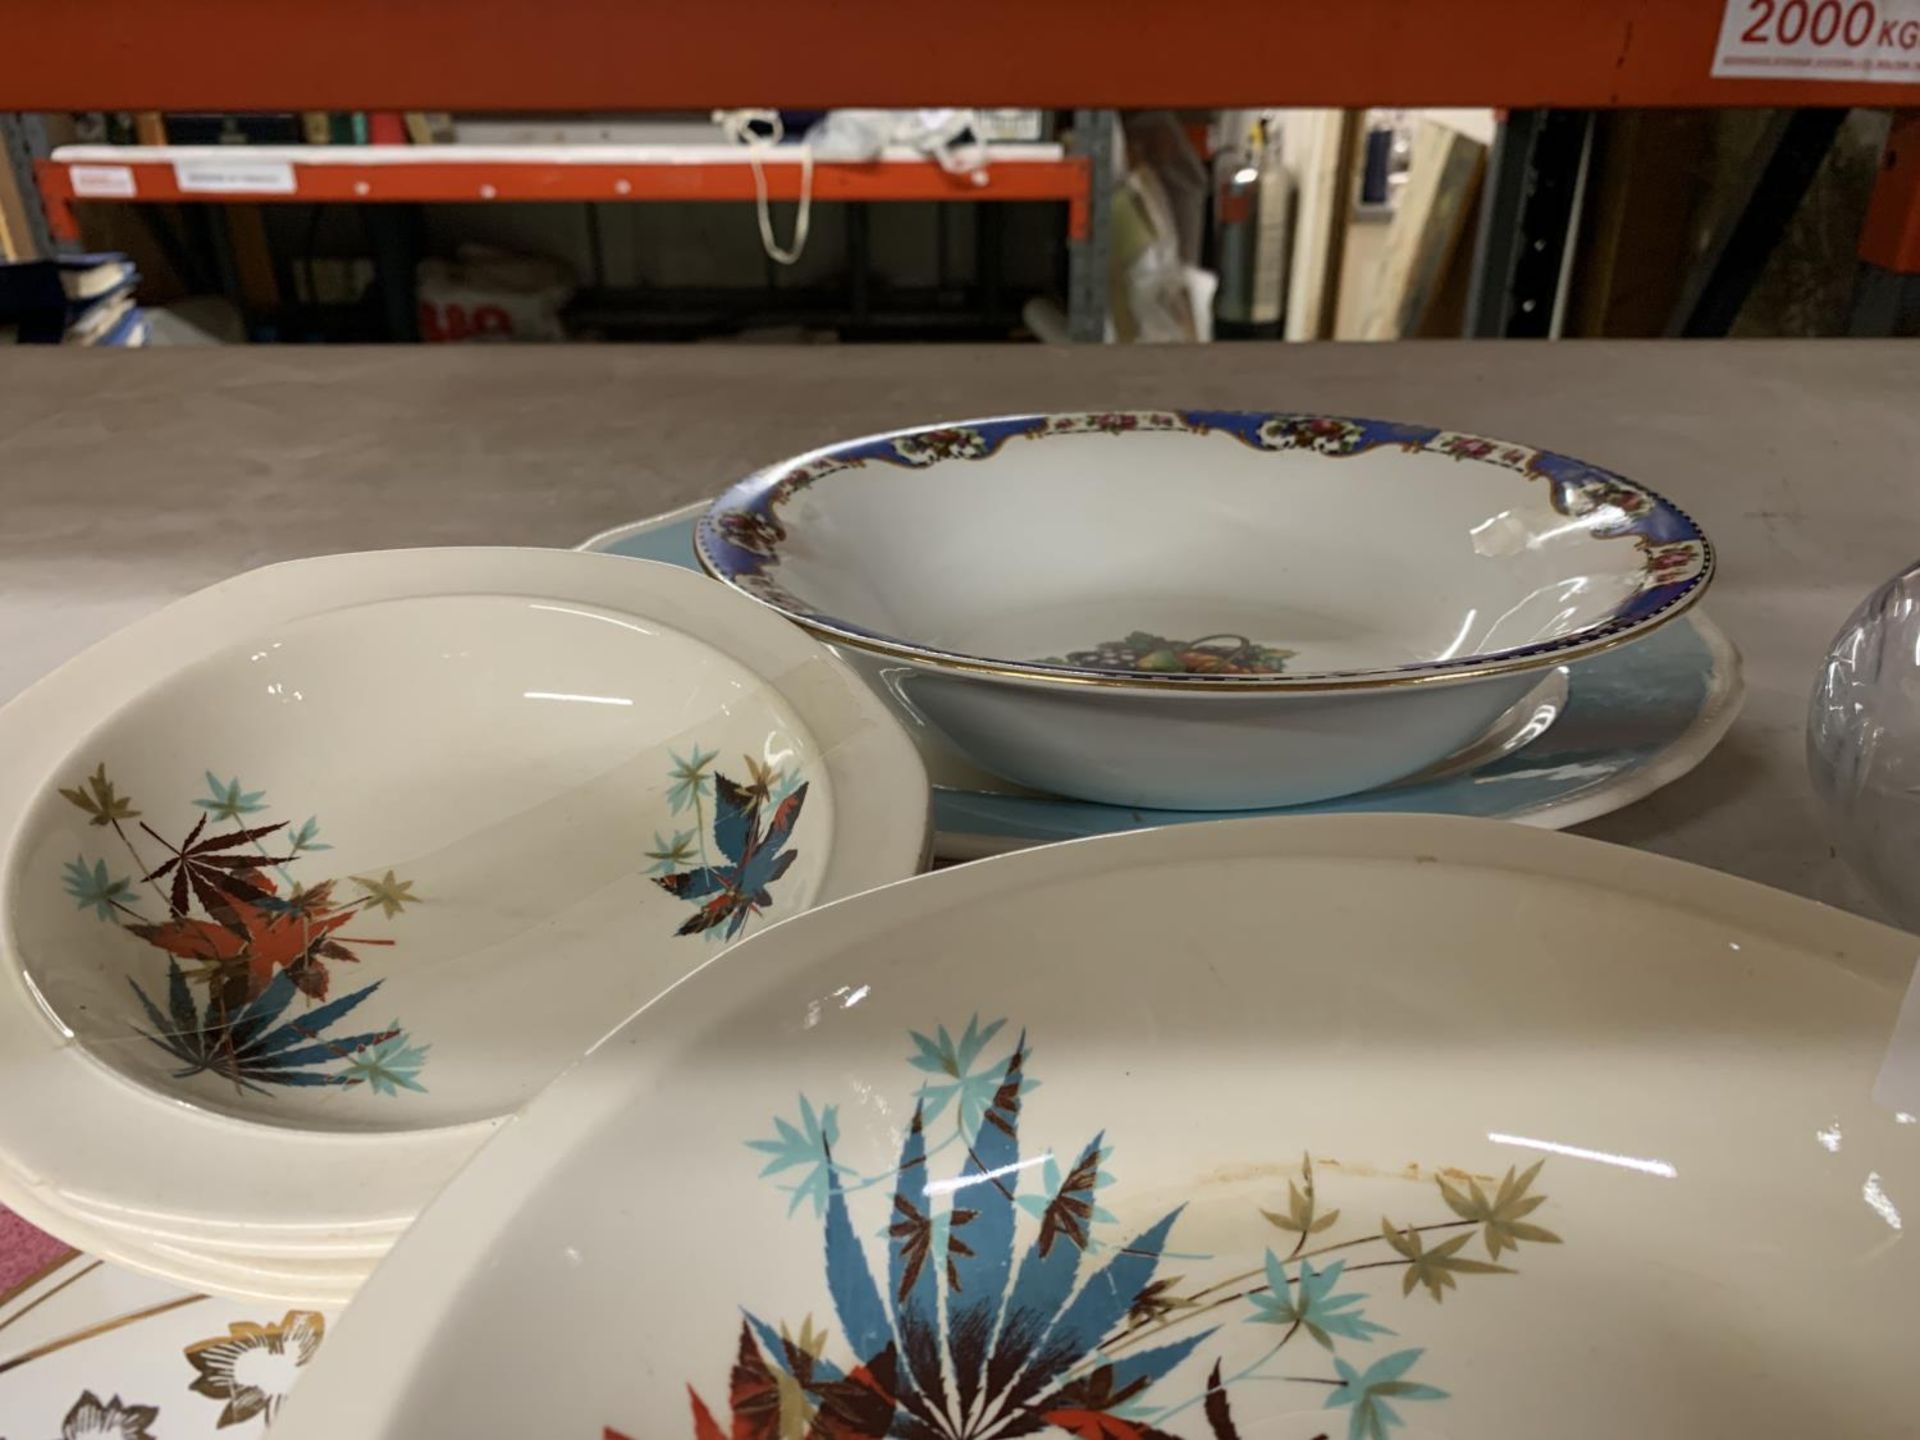 A QUANTITY OF VINTAGE SERVING BOWLS AND SERVING PLATES - Image 3 of 3